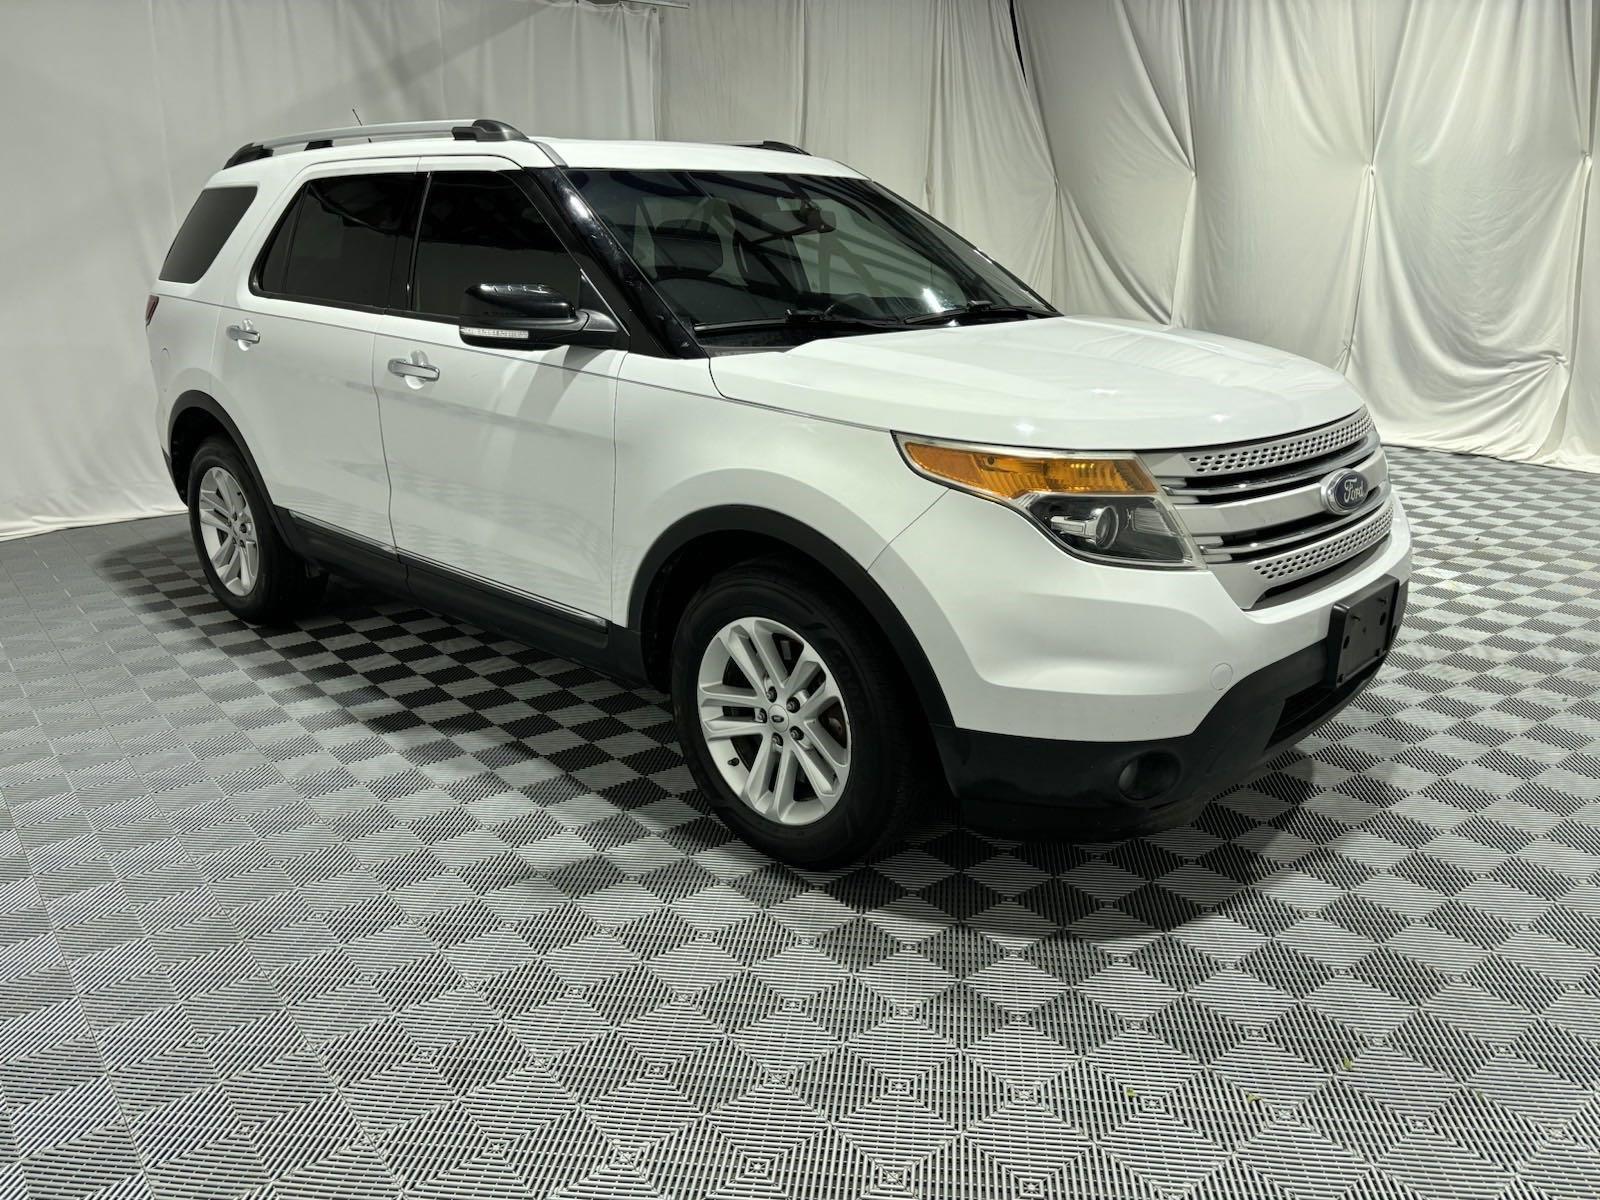 Used 2015 Ford Explorer XLT Sport Utility for sale in St Joseph MO